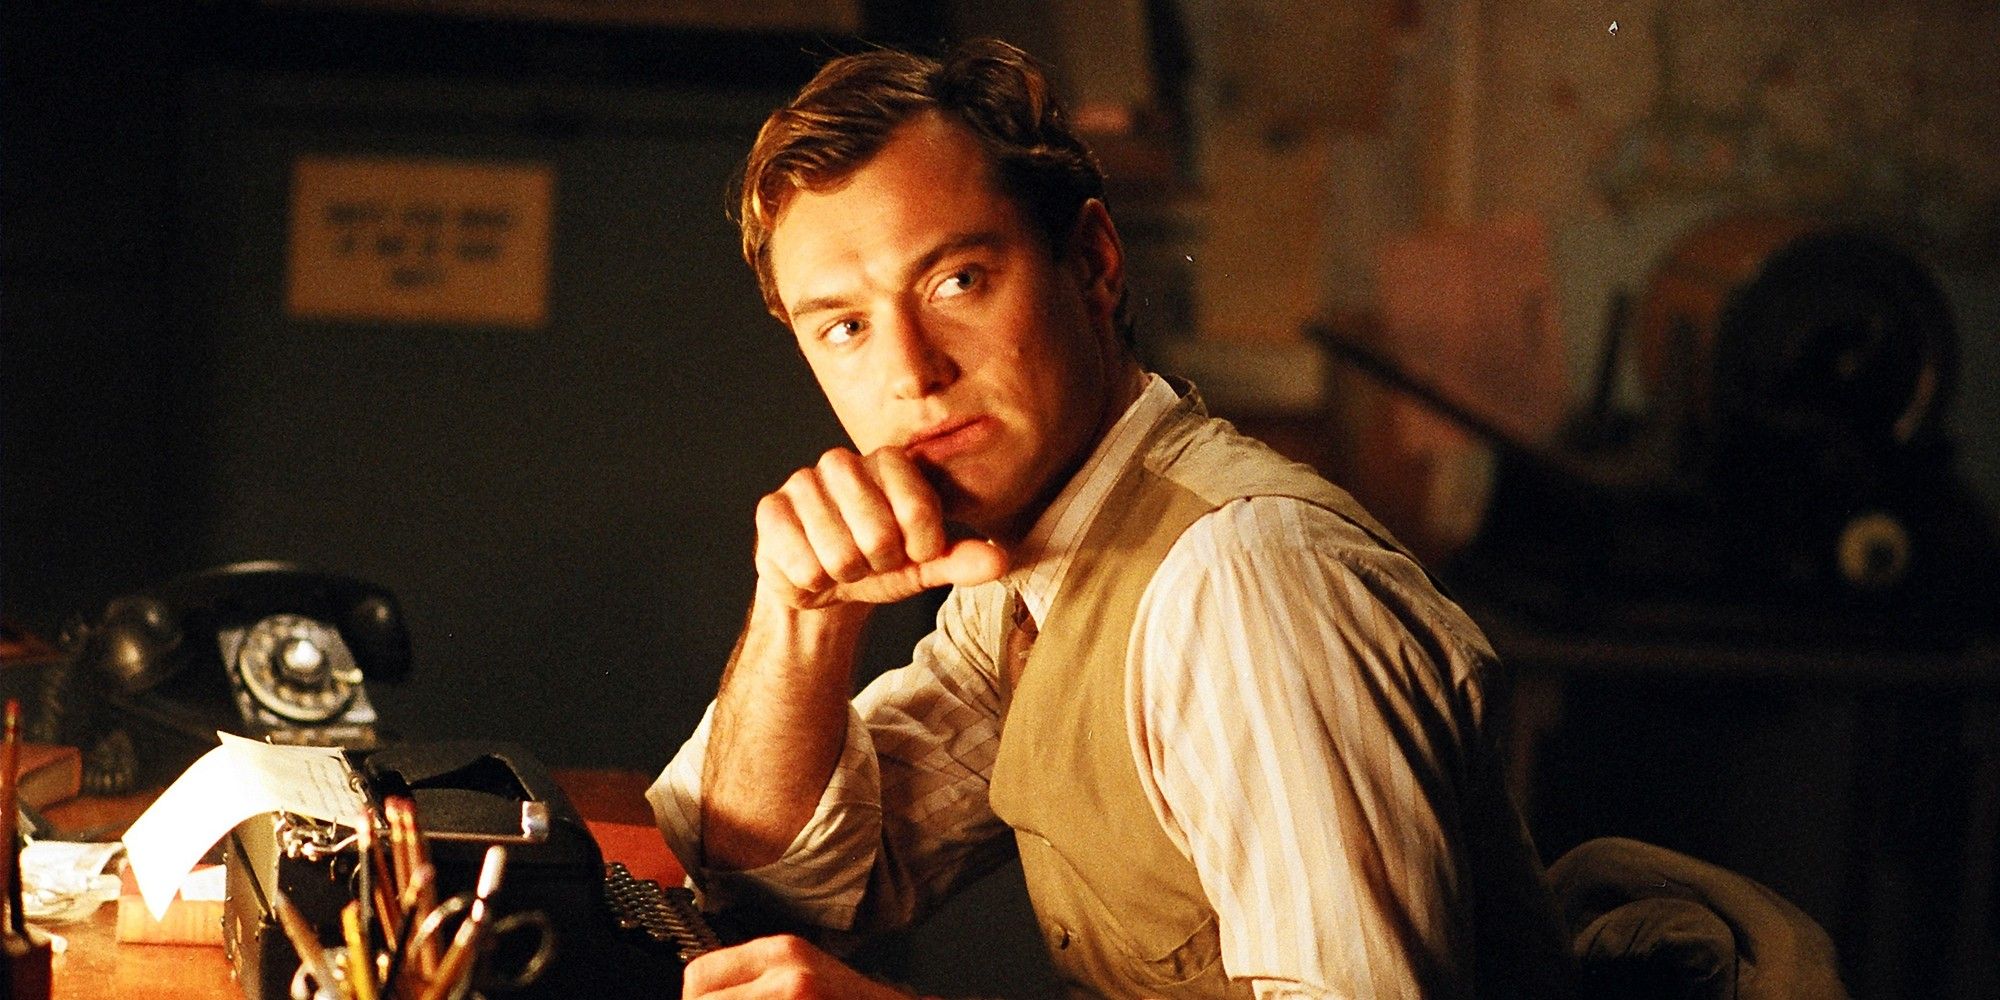 Jude Law in All The King's Men